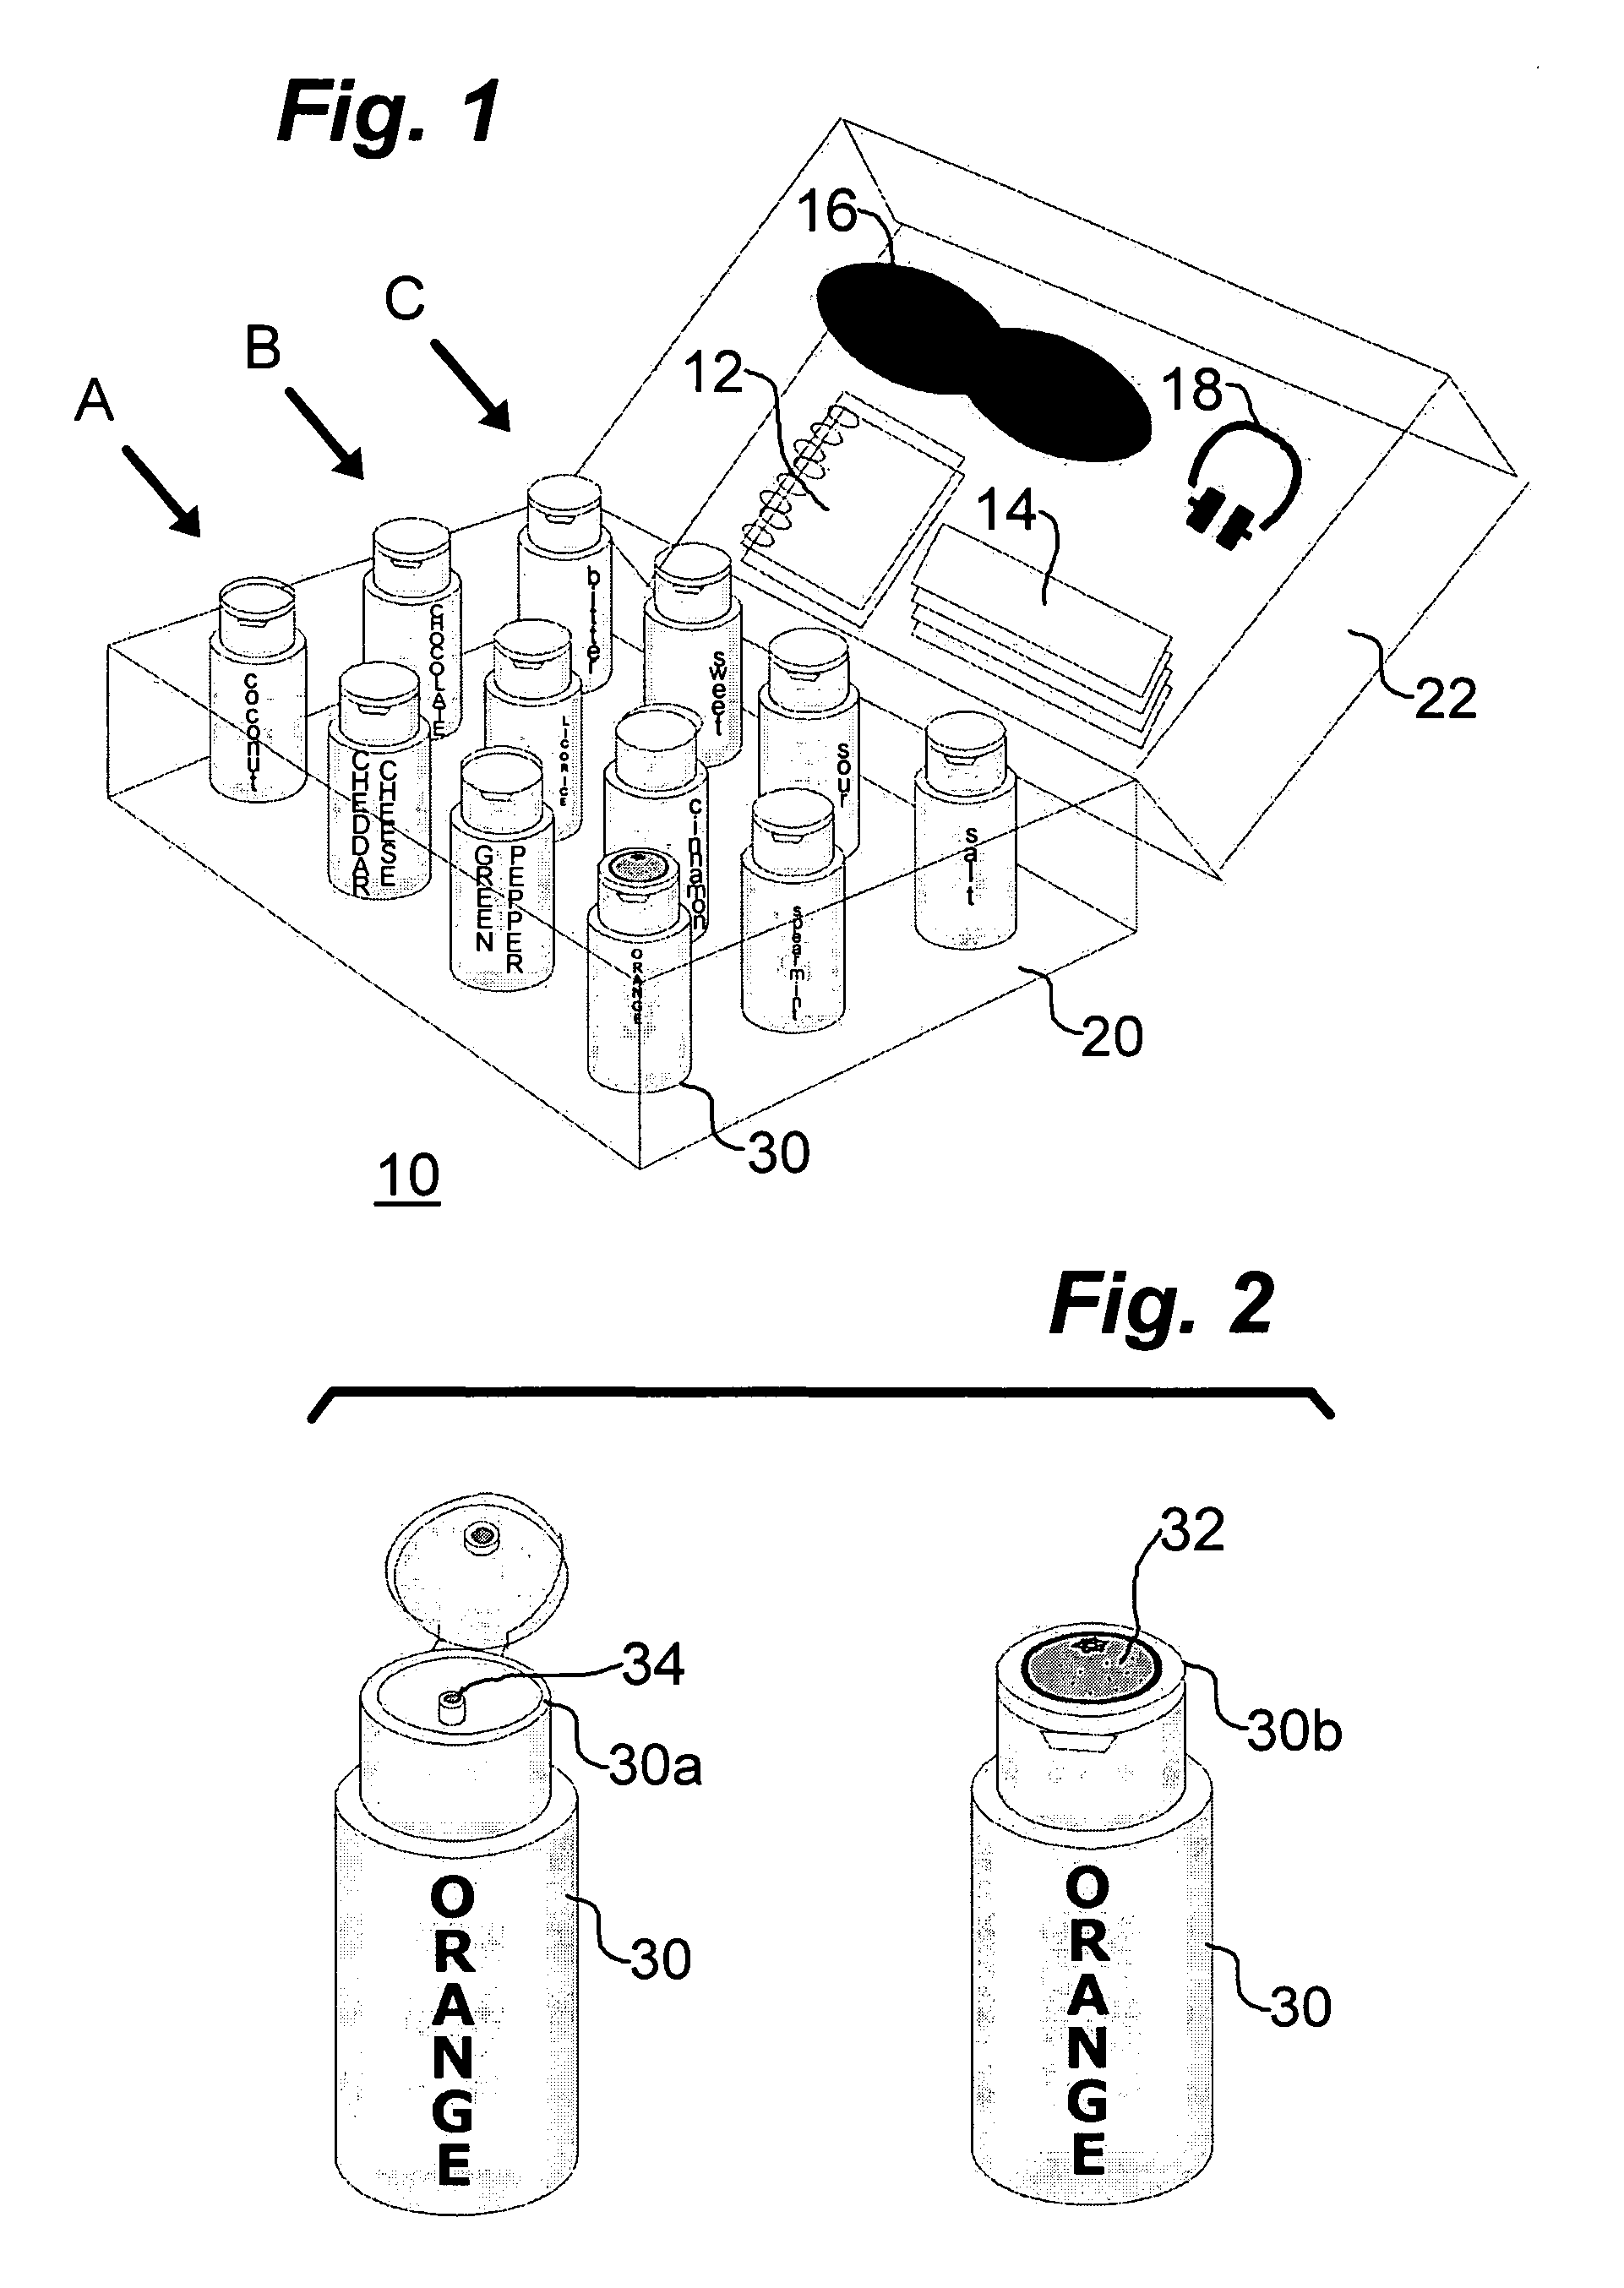 System for correlating odors and tastes to objective elements